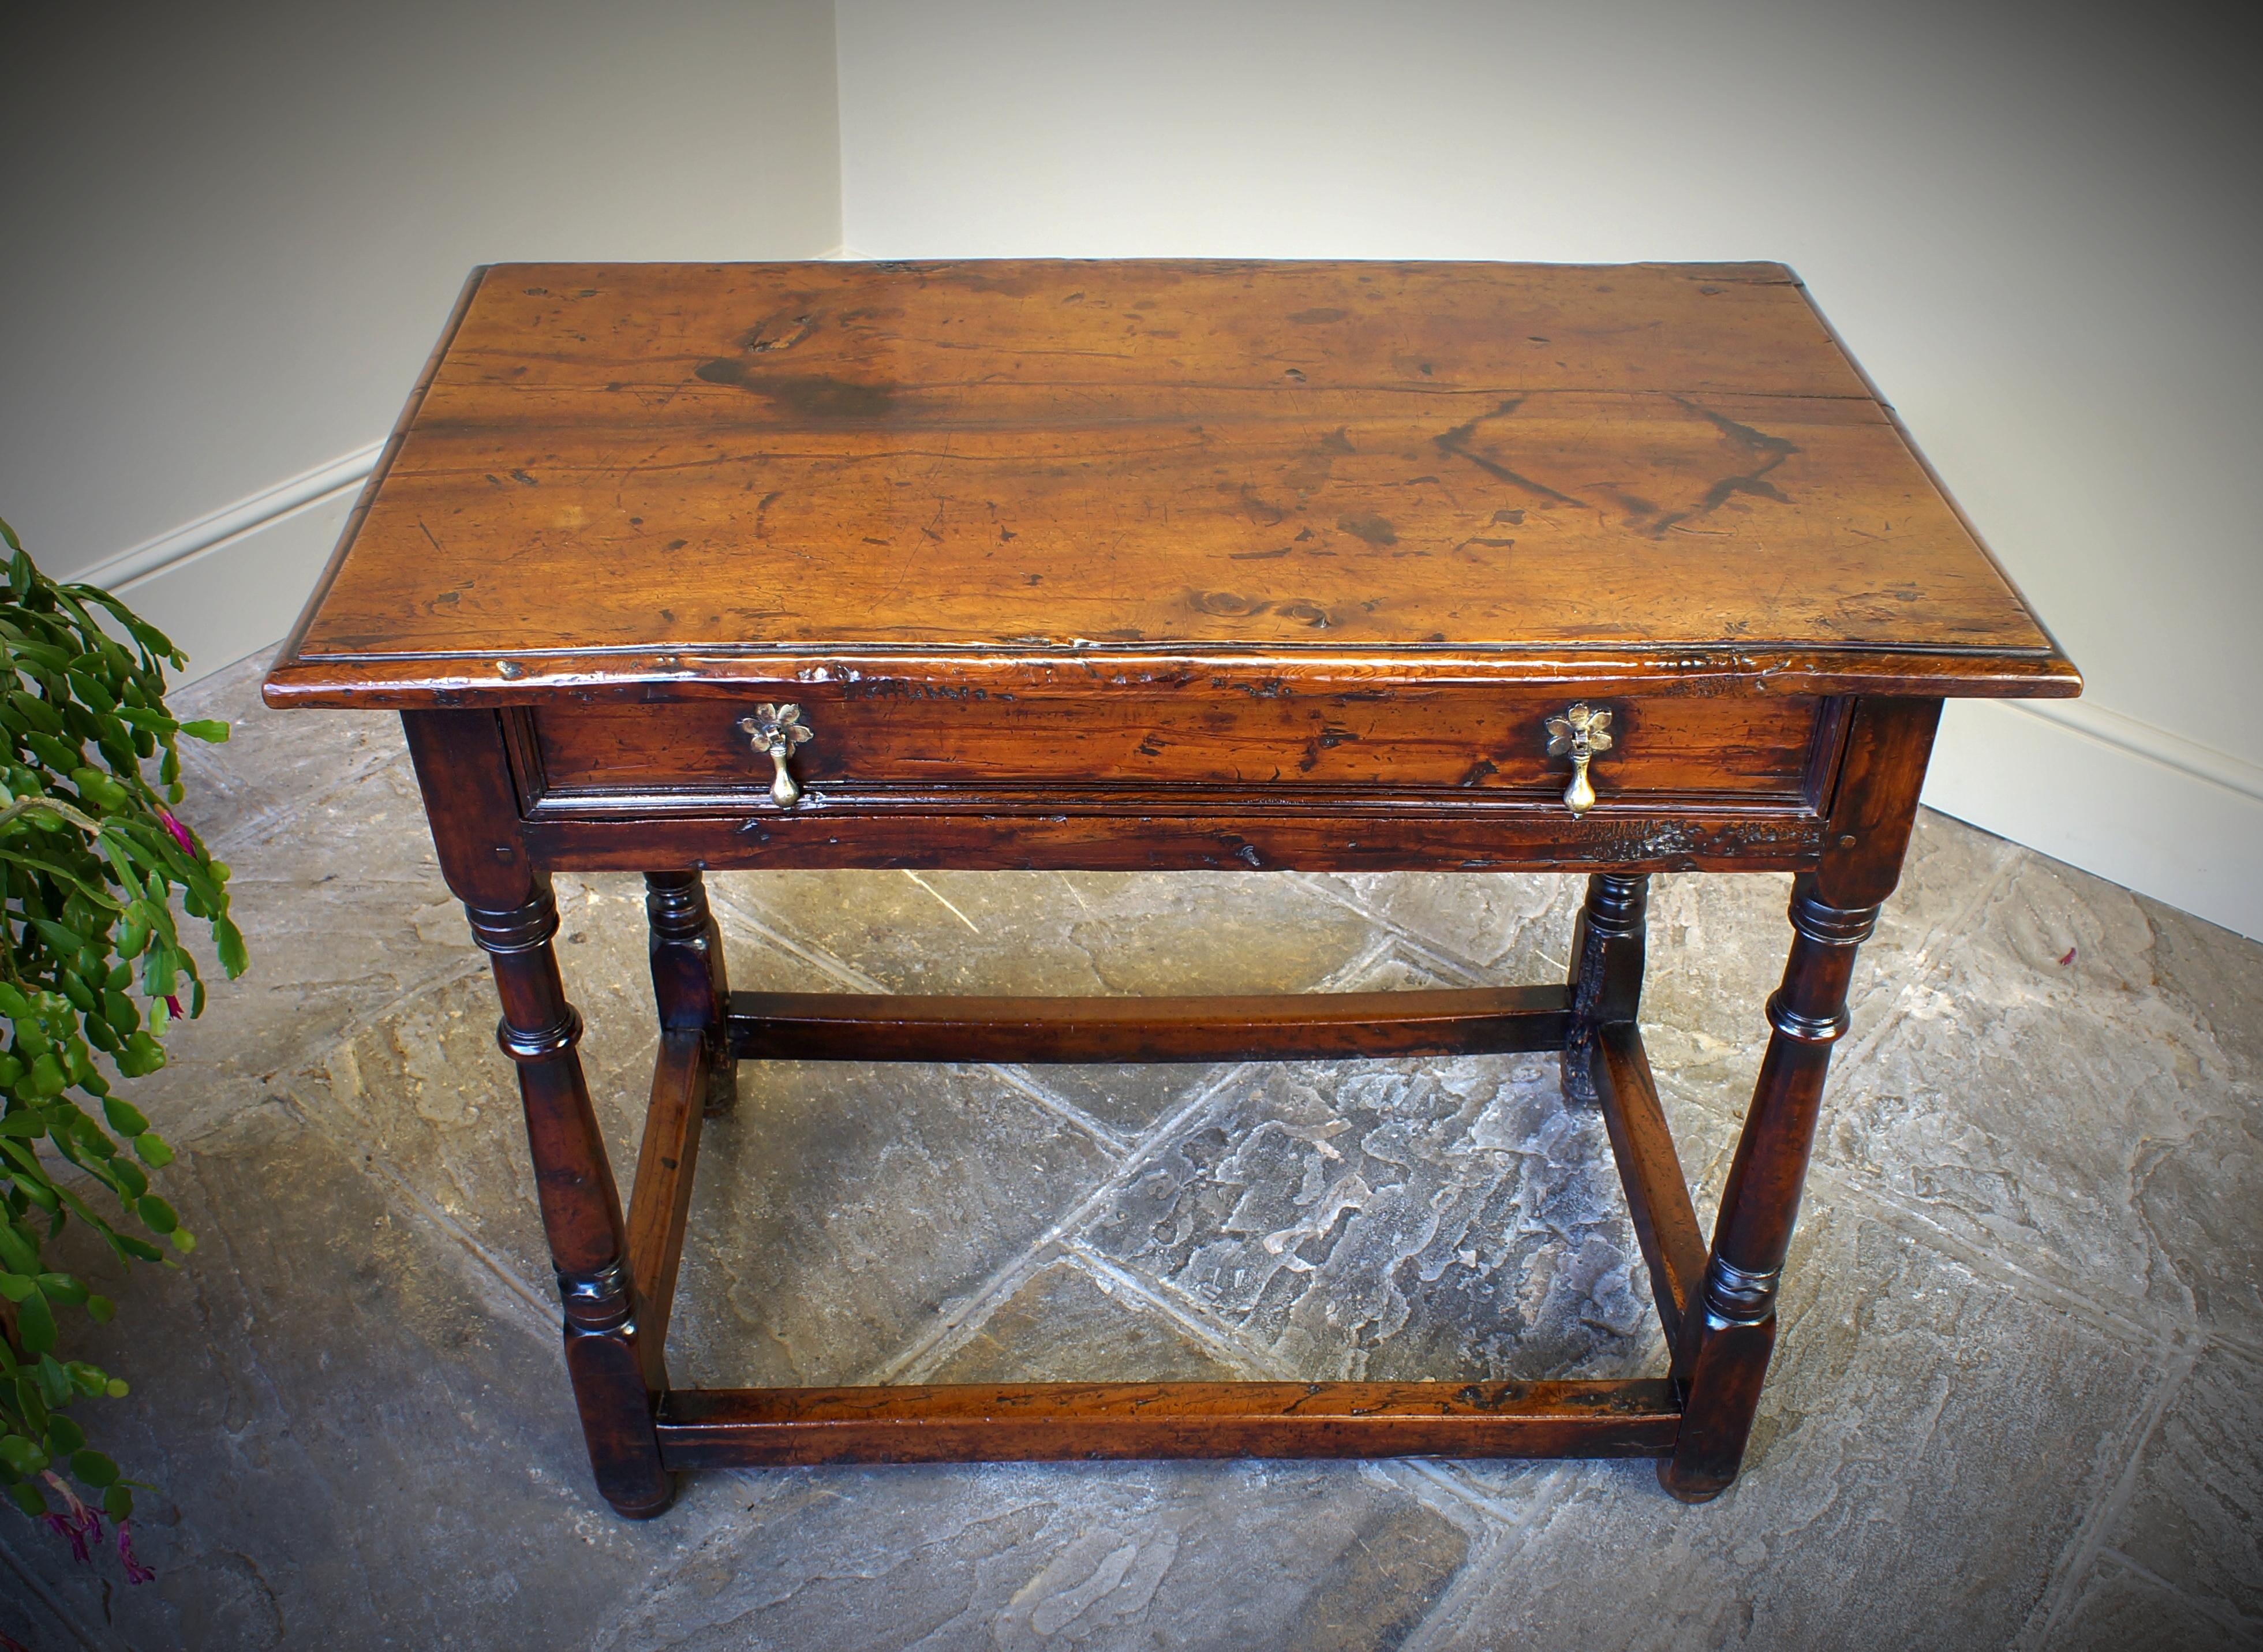 A rare late 17th century (circa 1690) yew wood side table having exceptional colour and surface.
The two piece top above a moulded drawer, having four well turned legs united by peripheral stretchers
A rare example in fine original condition.
Yew is